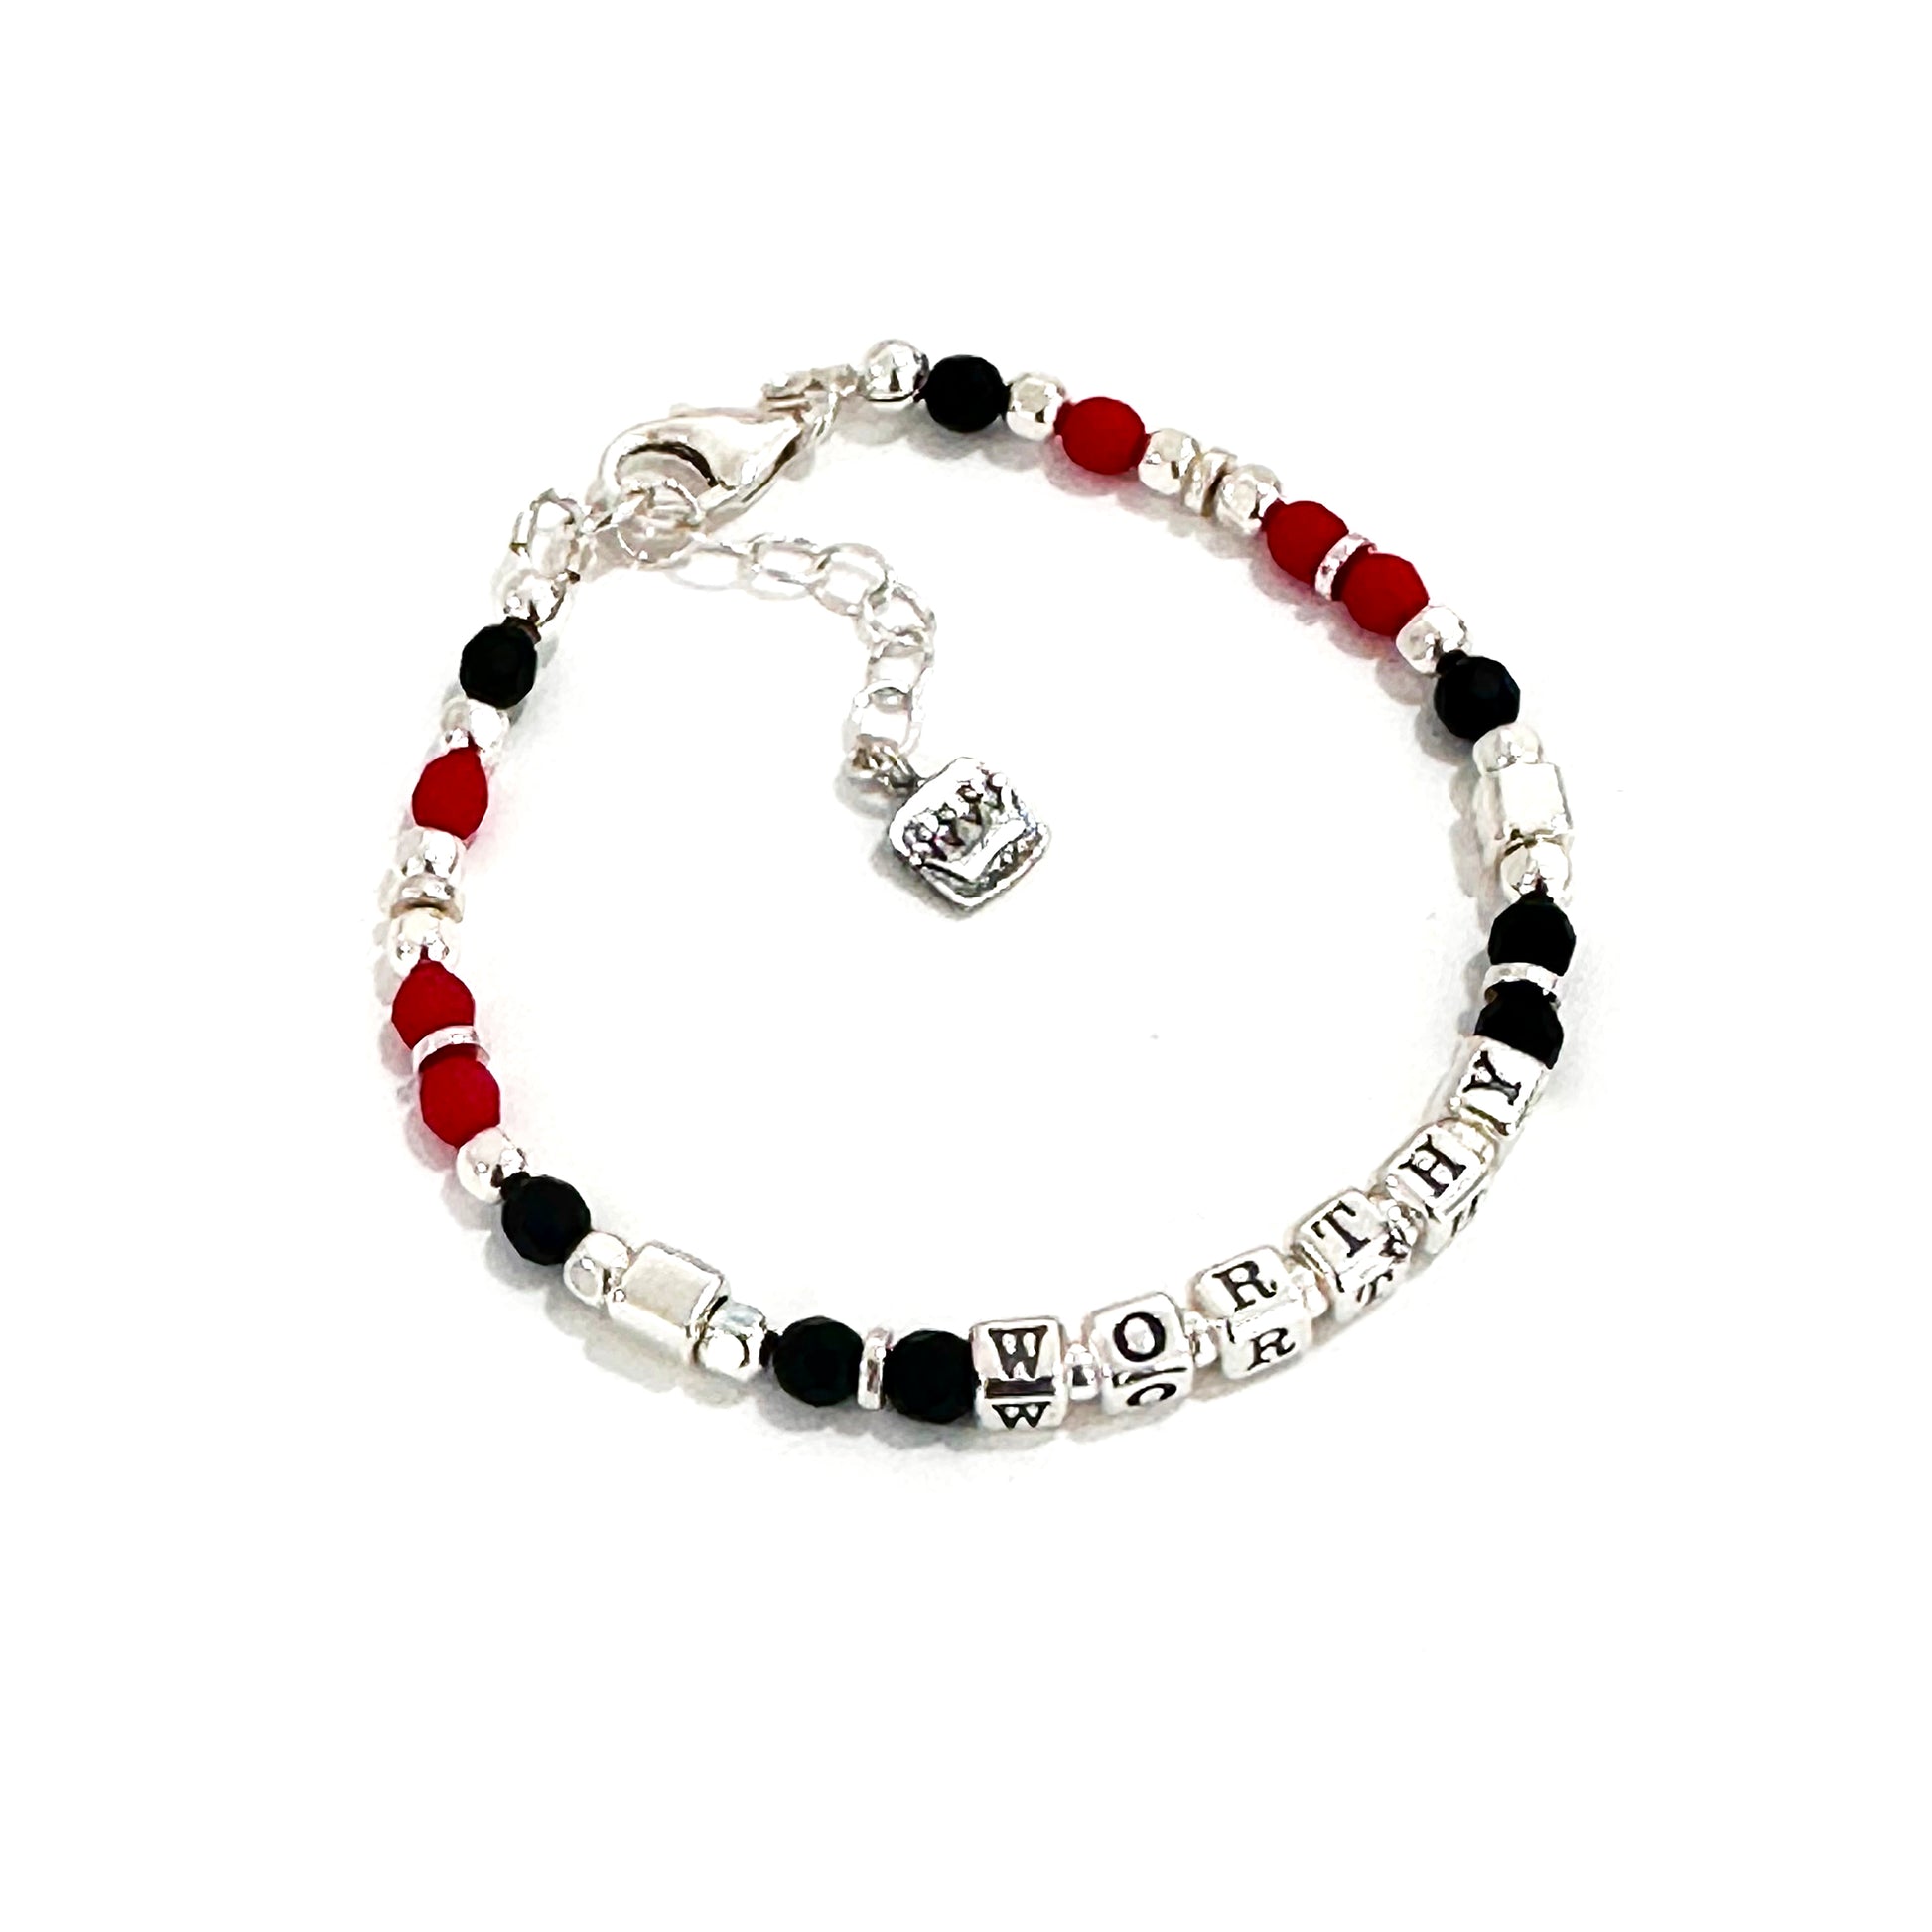 You are Worthy sterling silver gift bracelet